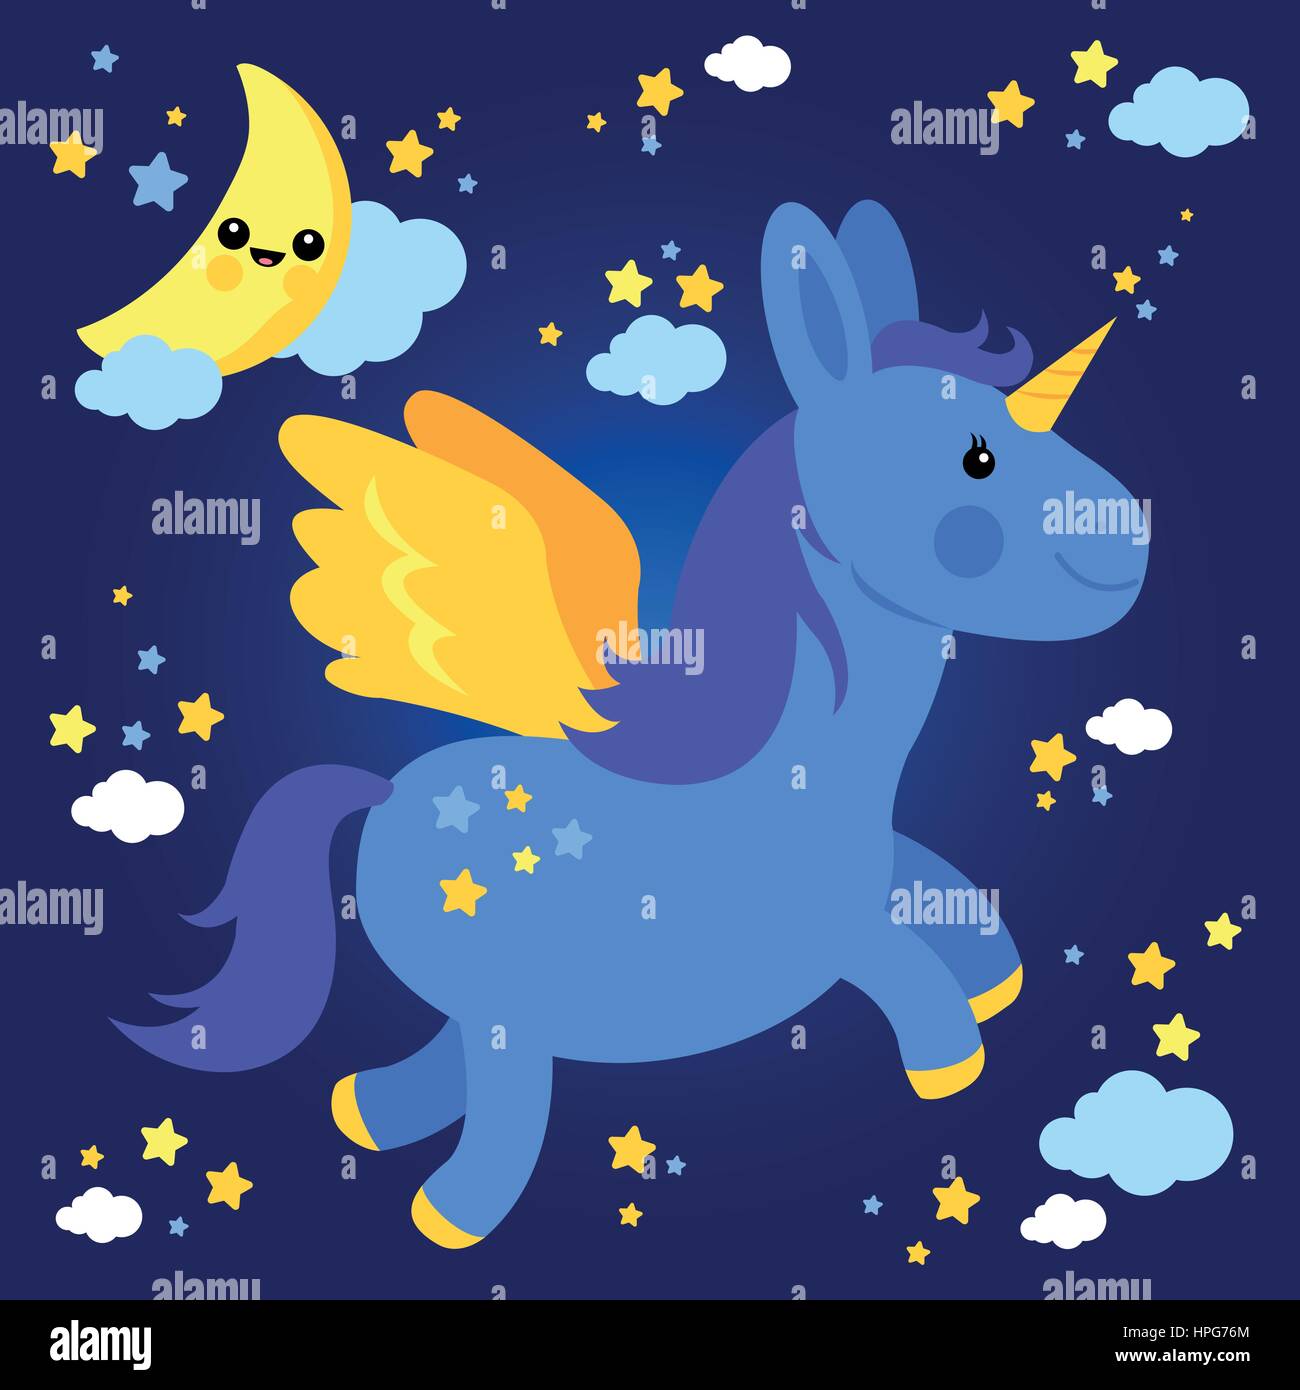 Vector Illustration Of A Cute Unicorn Flying In The Night Sky With Moon